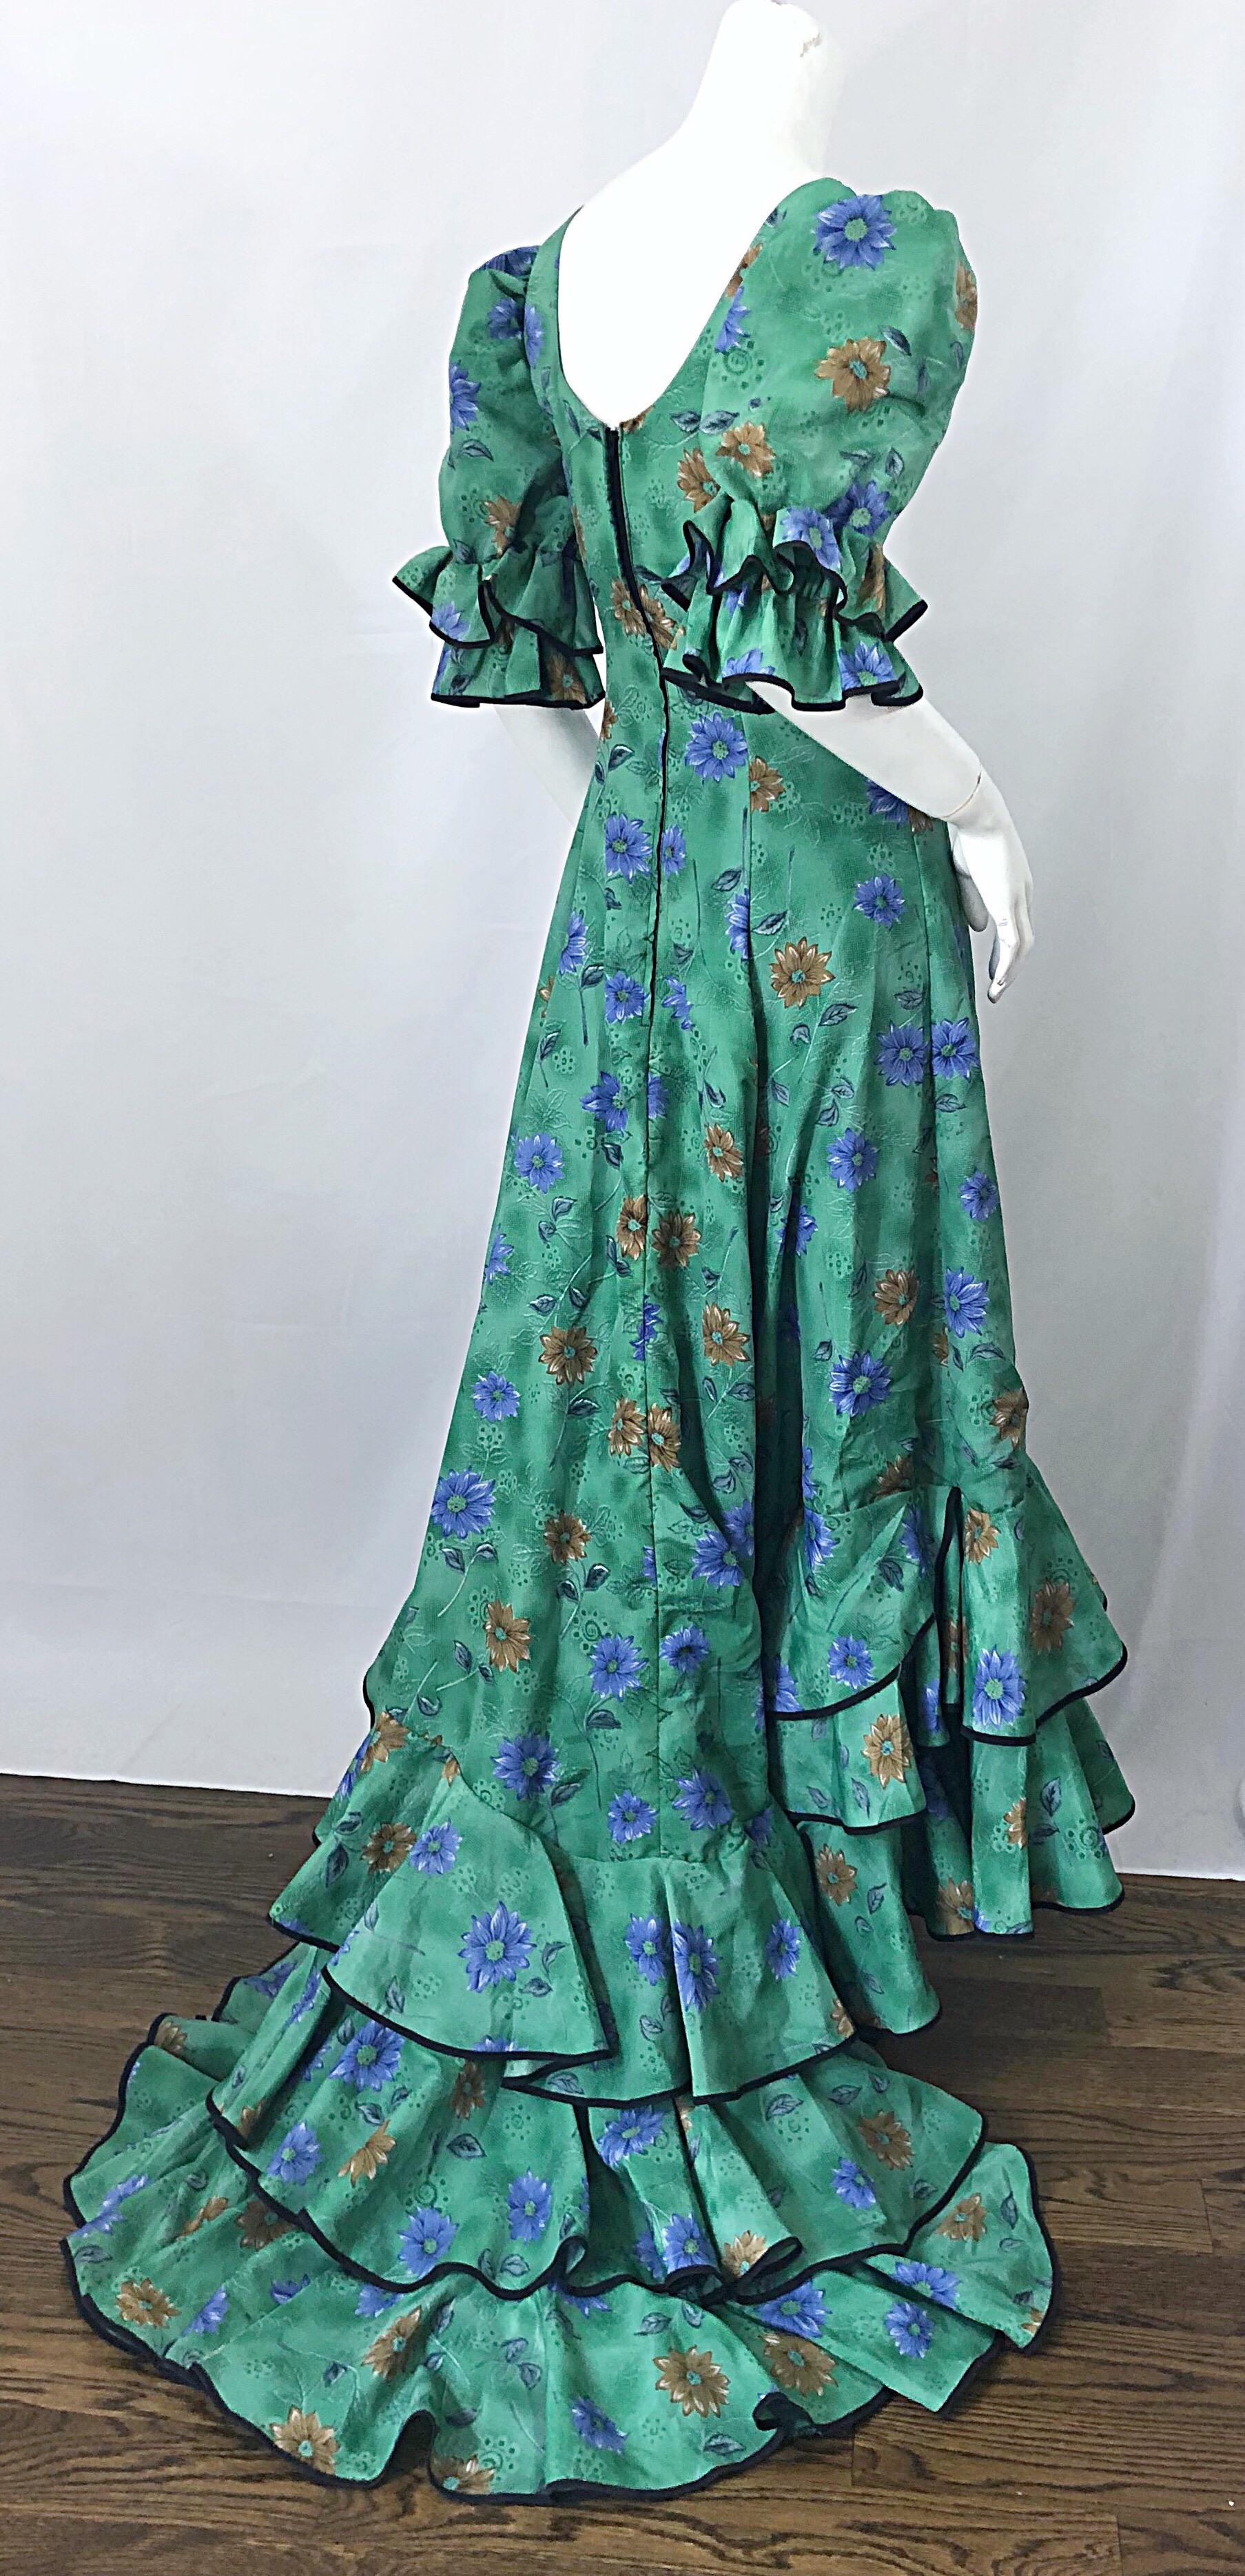 Amazing Vintage Victorian Inspired 1970s Does 1800s Steampunk Green Trained Gown For Sale 4